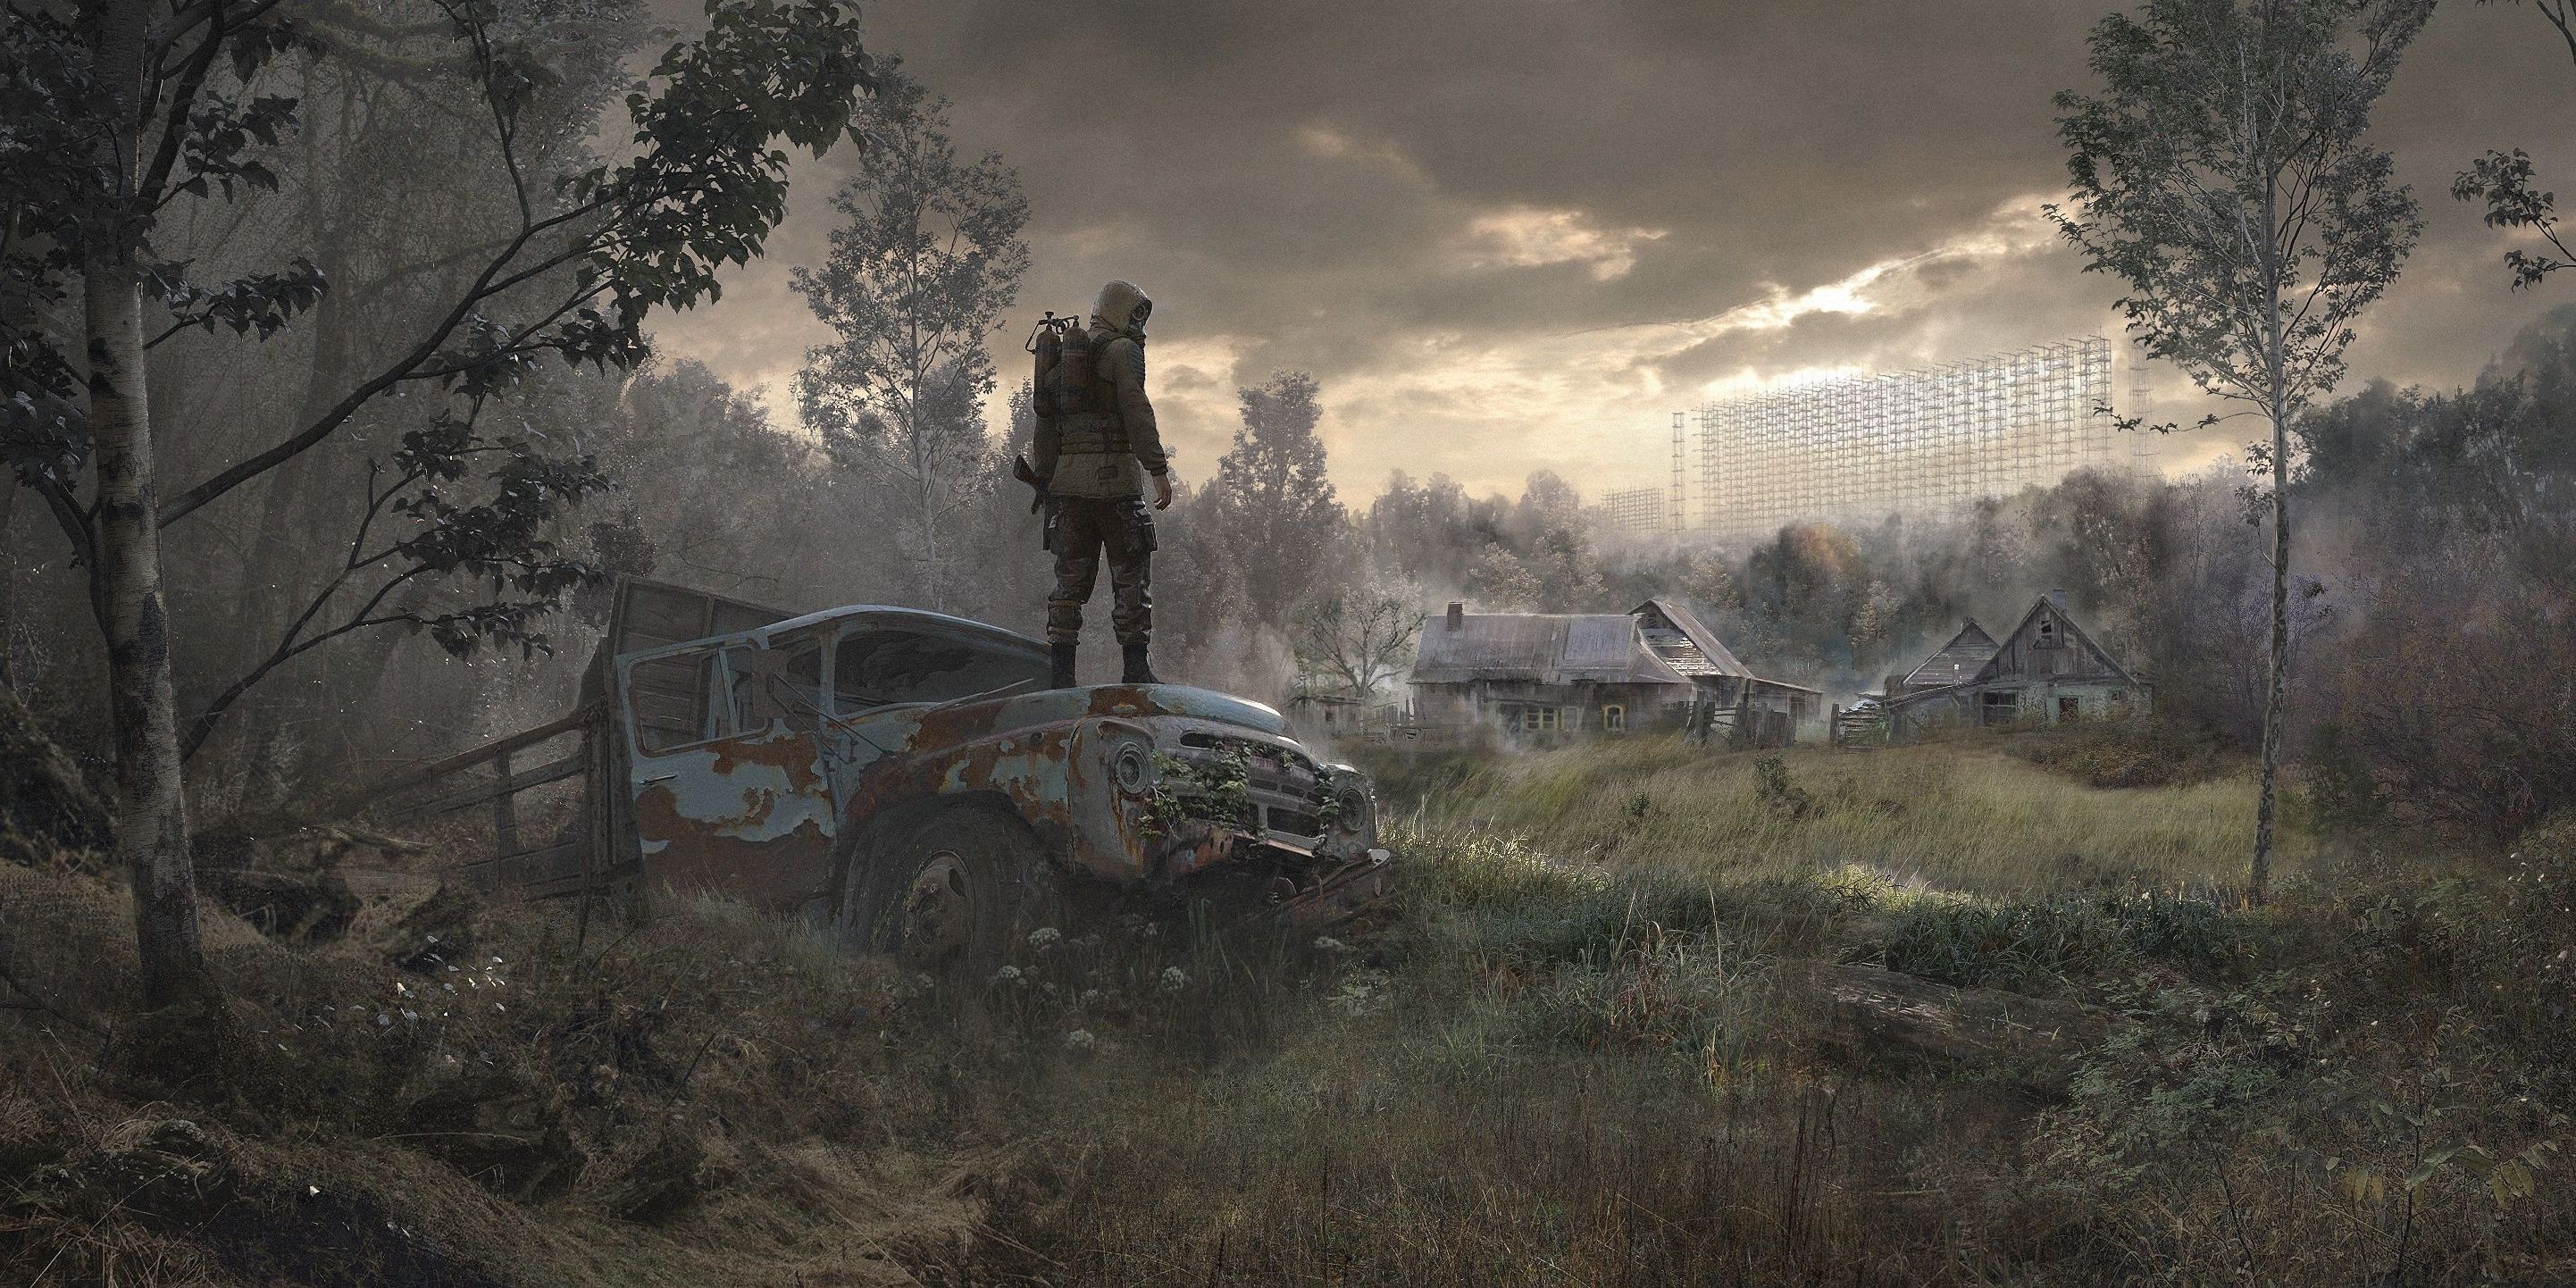 S.T.A.L.K.E.R. 2 poster featuring a man standing on top of a decrepit farm truck in a grassy area